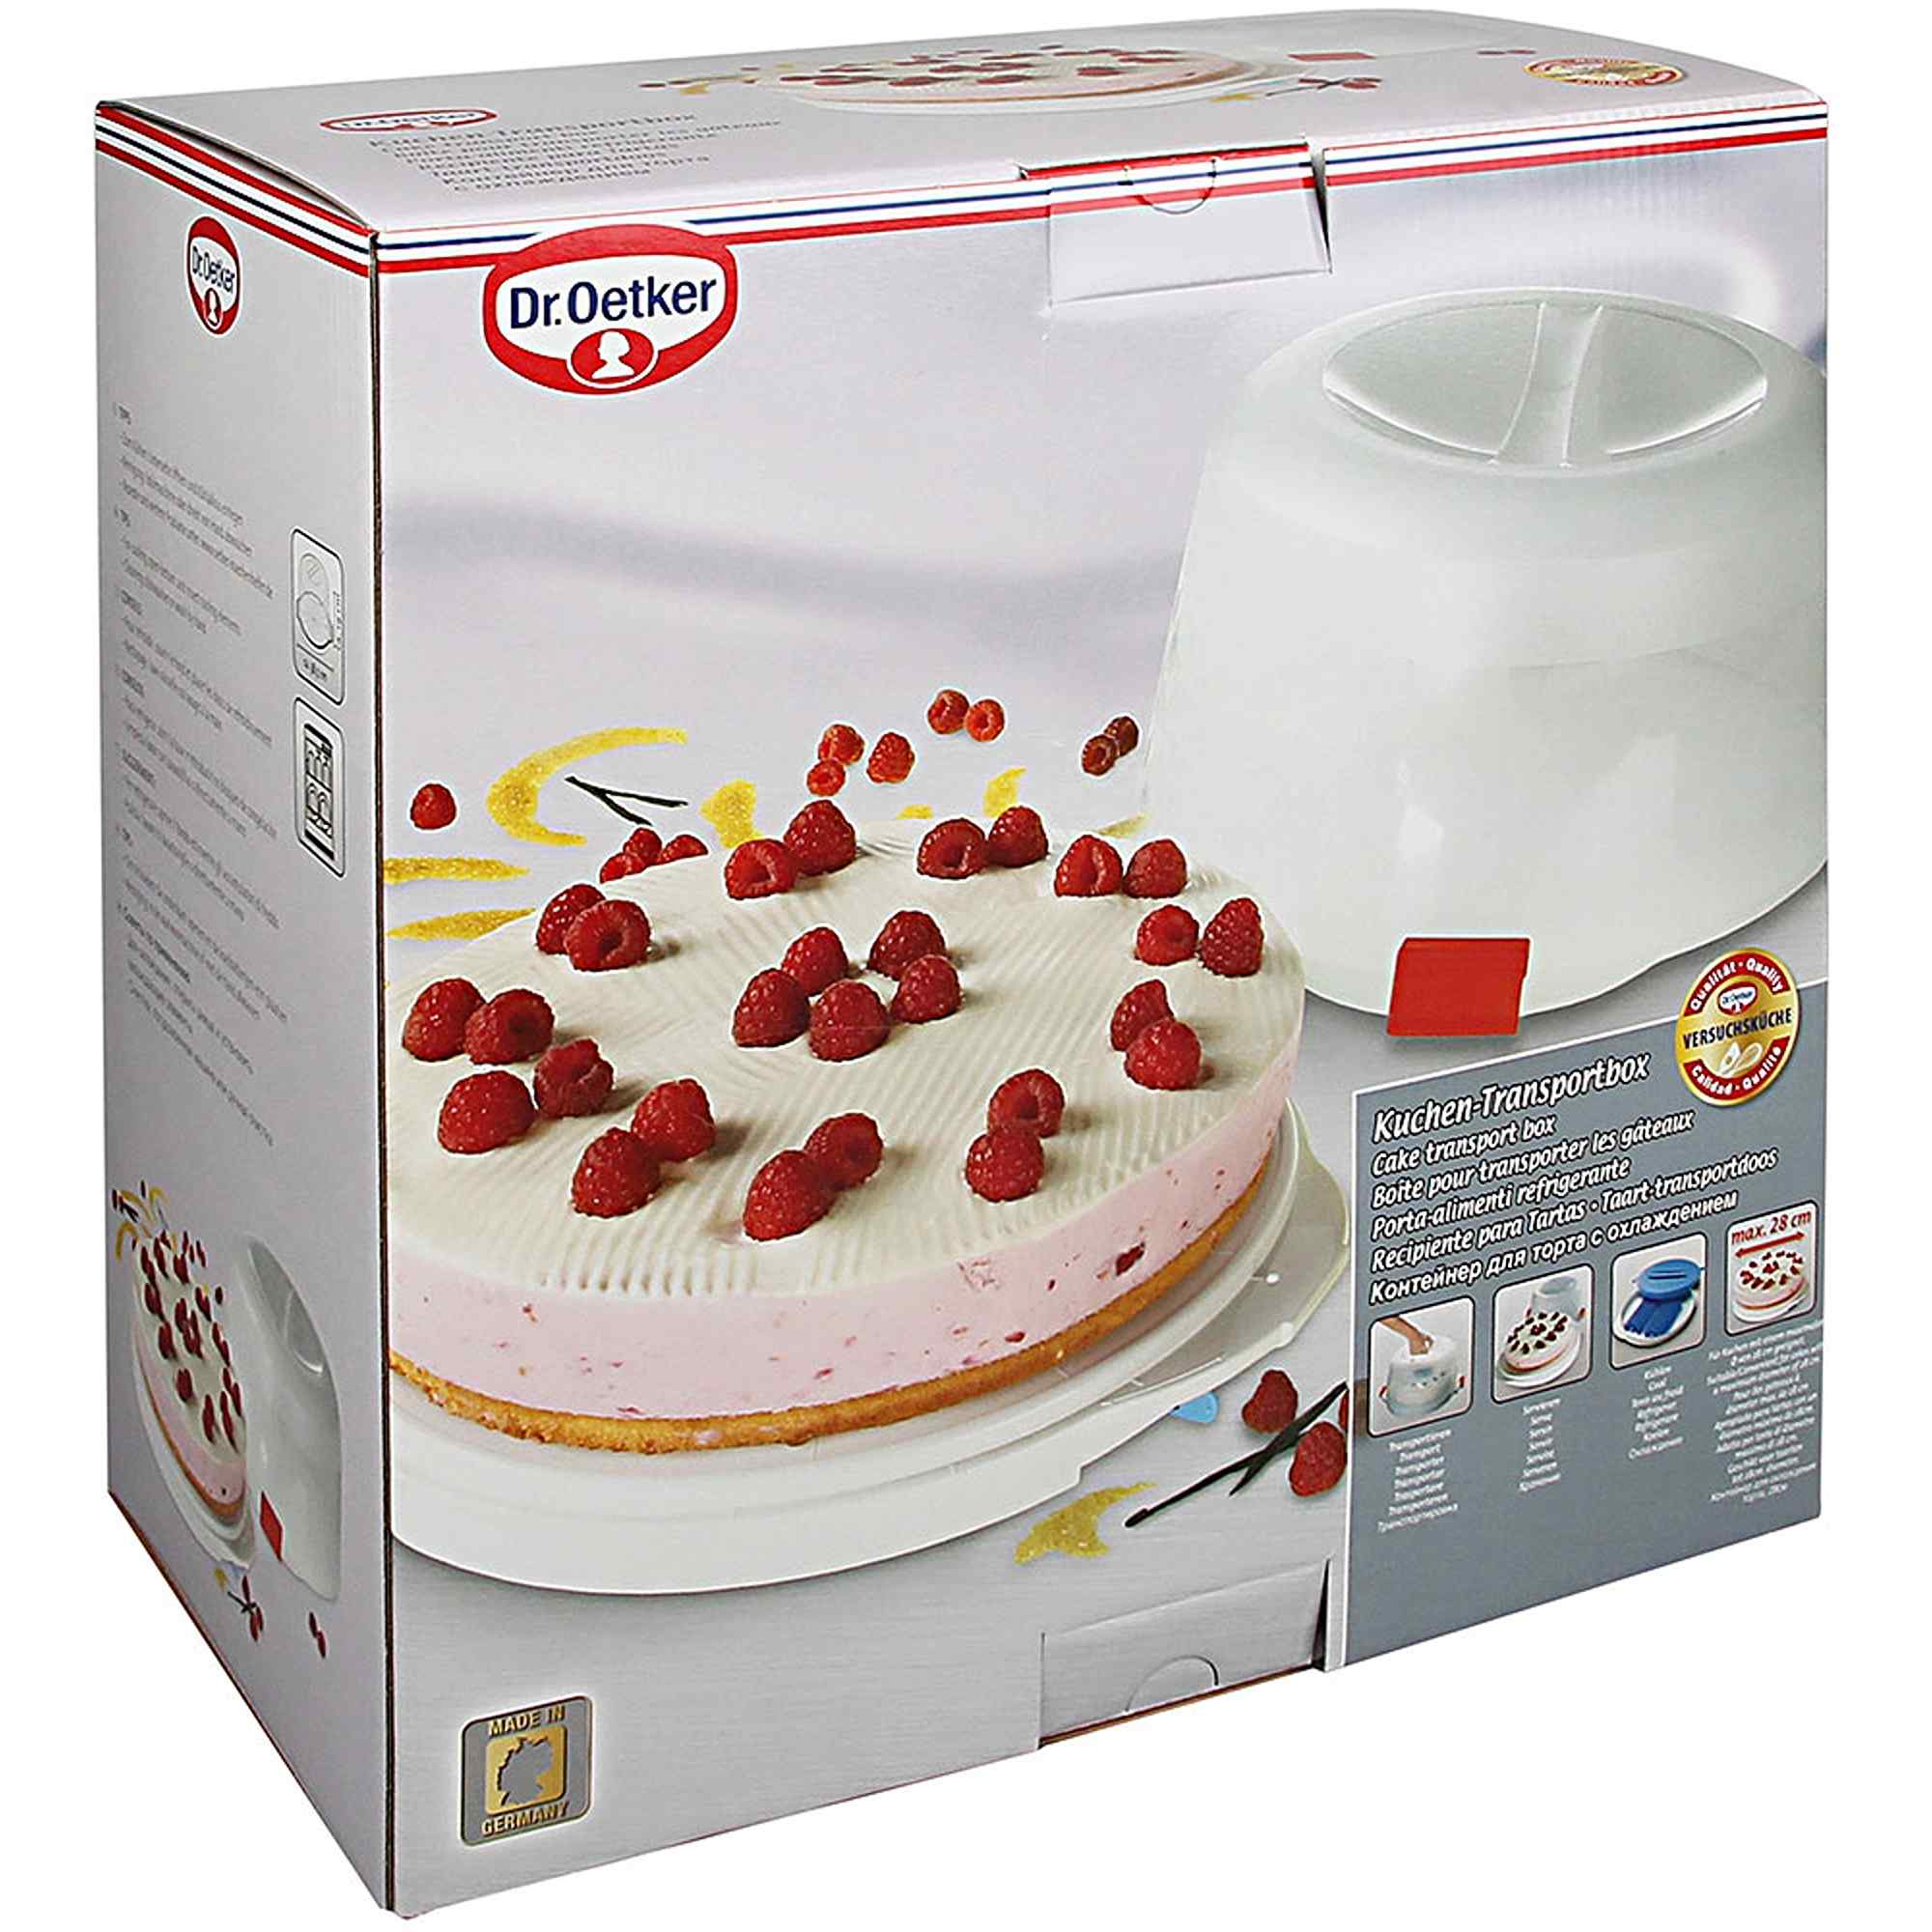 6 Pack Clear Plastic 8 inch Cake Boxes with Window Holder Carrier with Gold  Lid for Packaging, 8 x 8 x 6 in. - Walmart.com